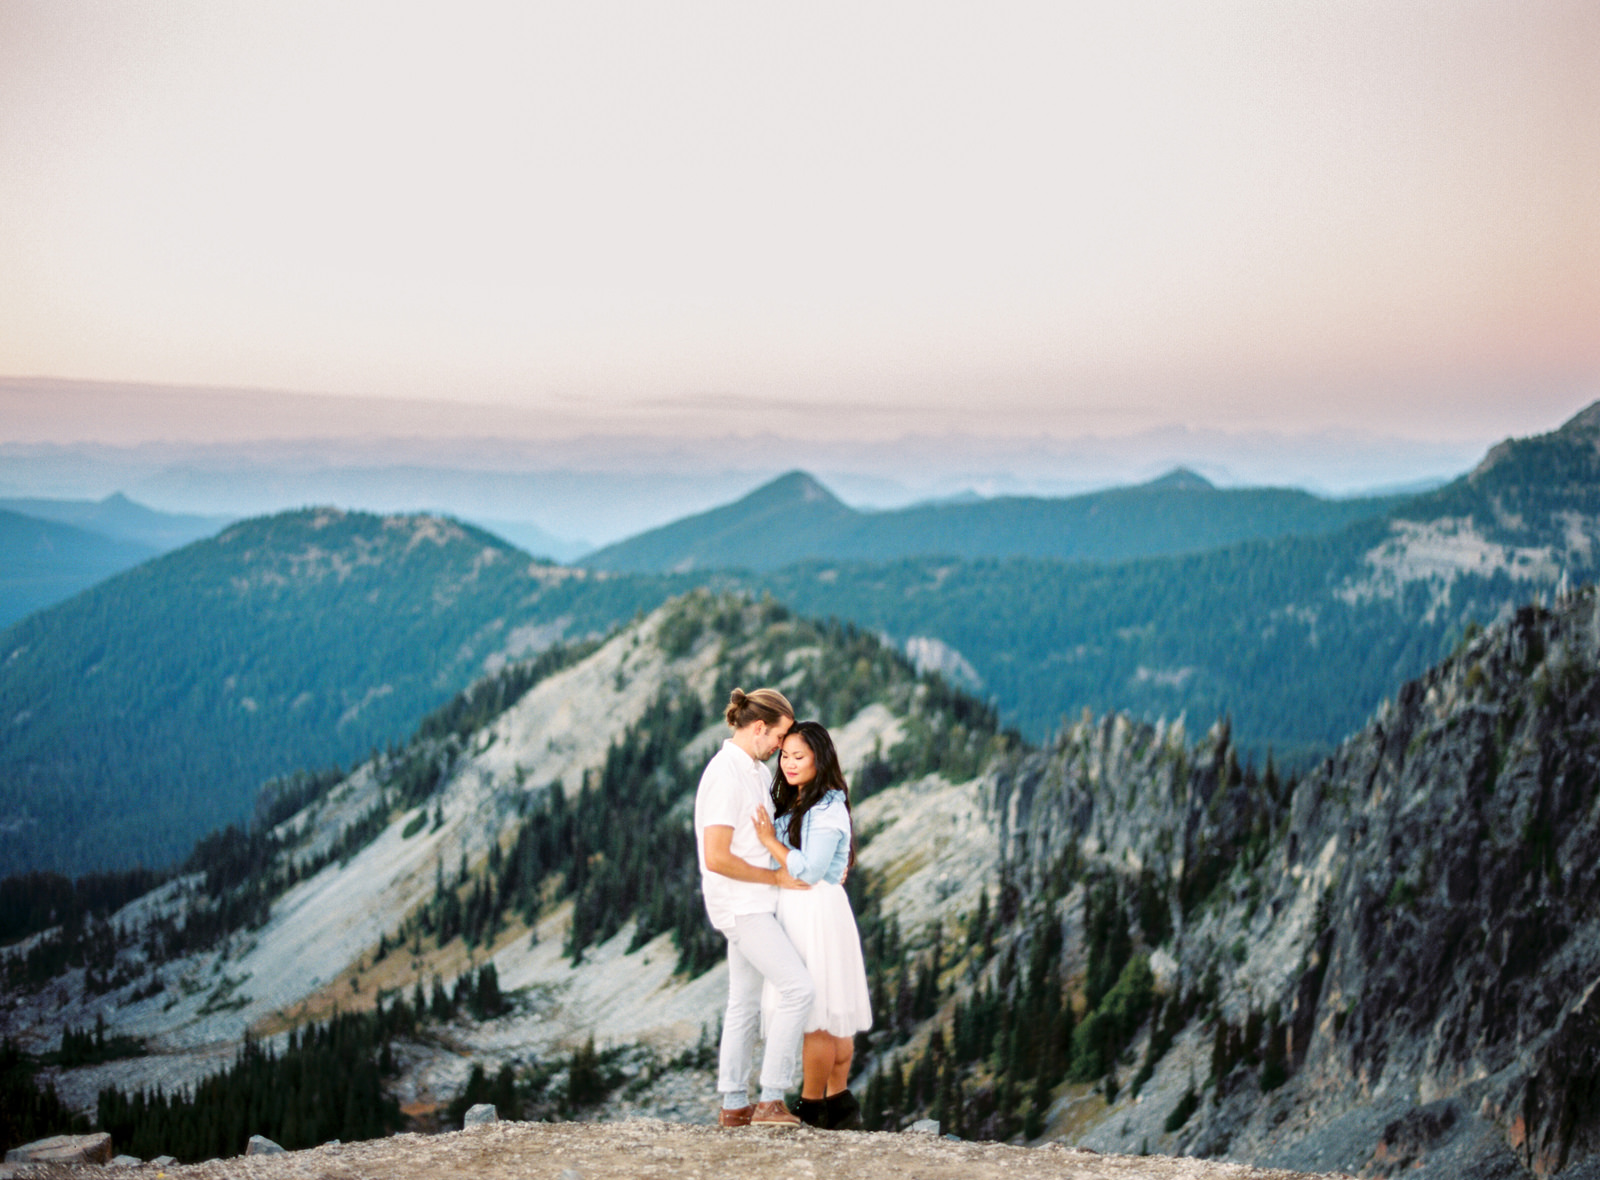 186-epic-mountain-engagement-session-at-mt-rainer-by-washington-film-photographer.jpg